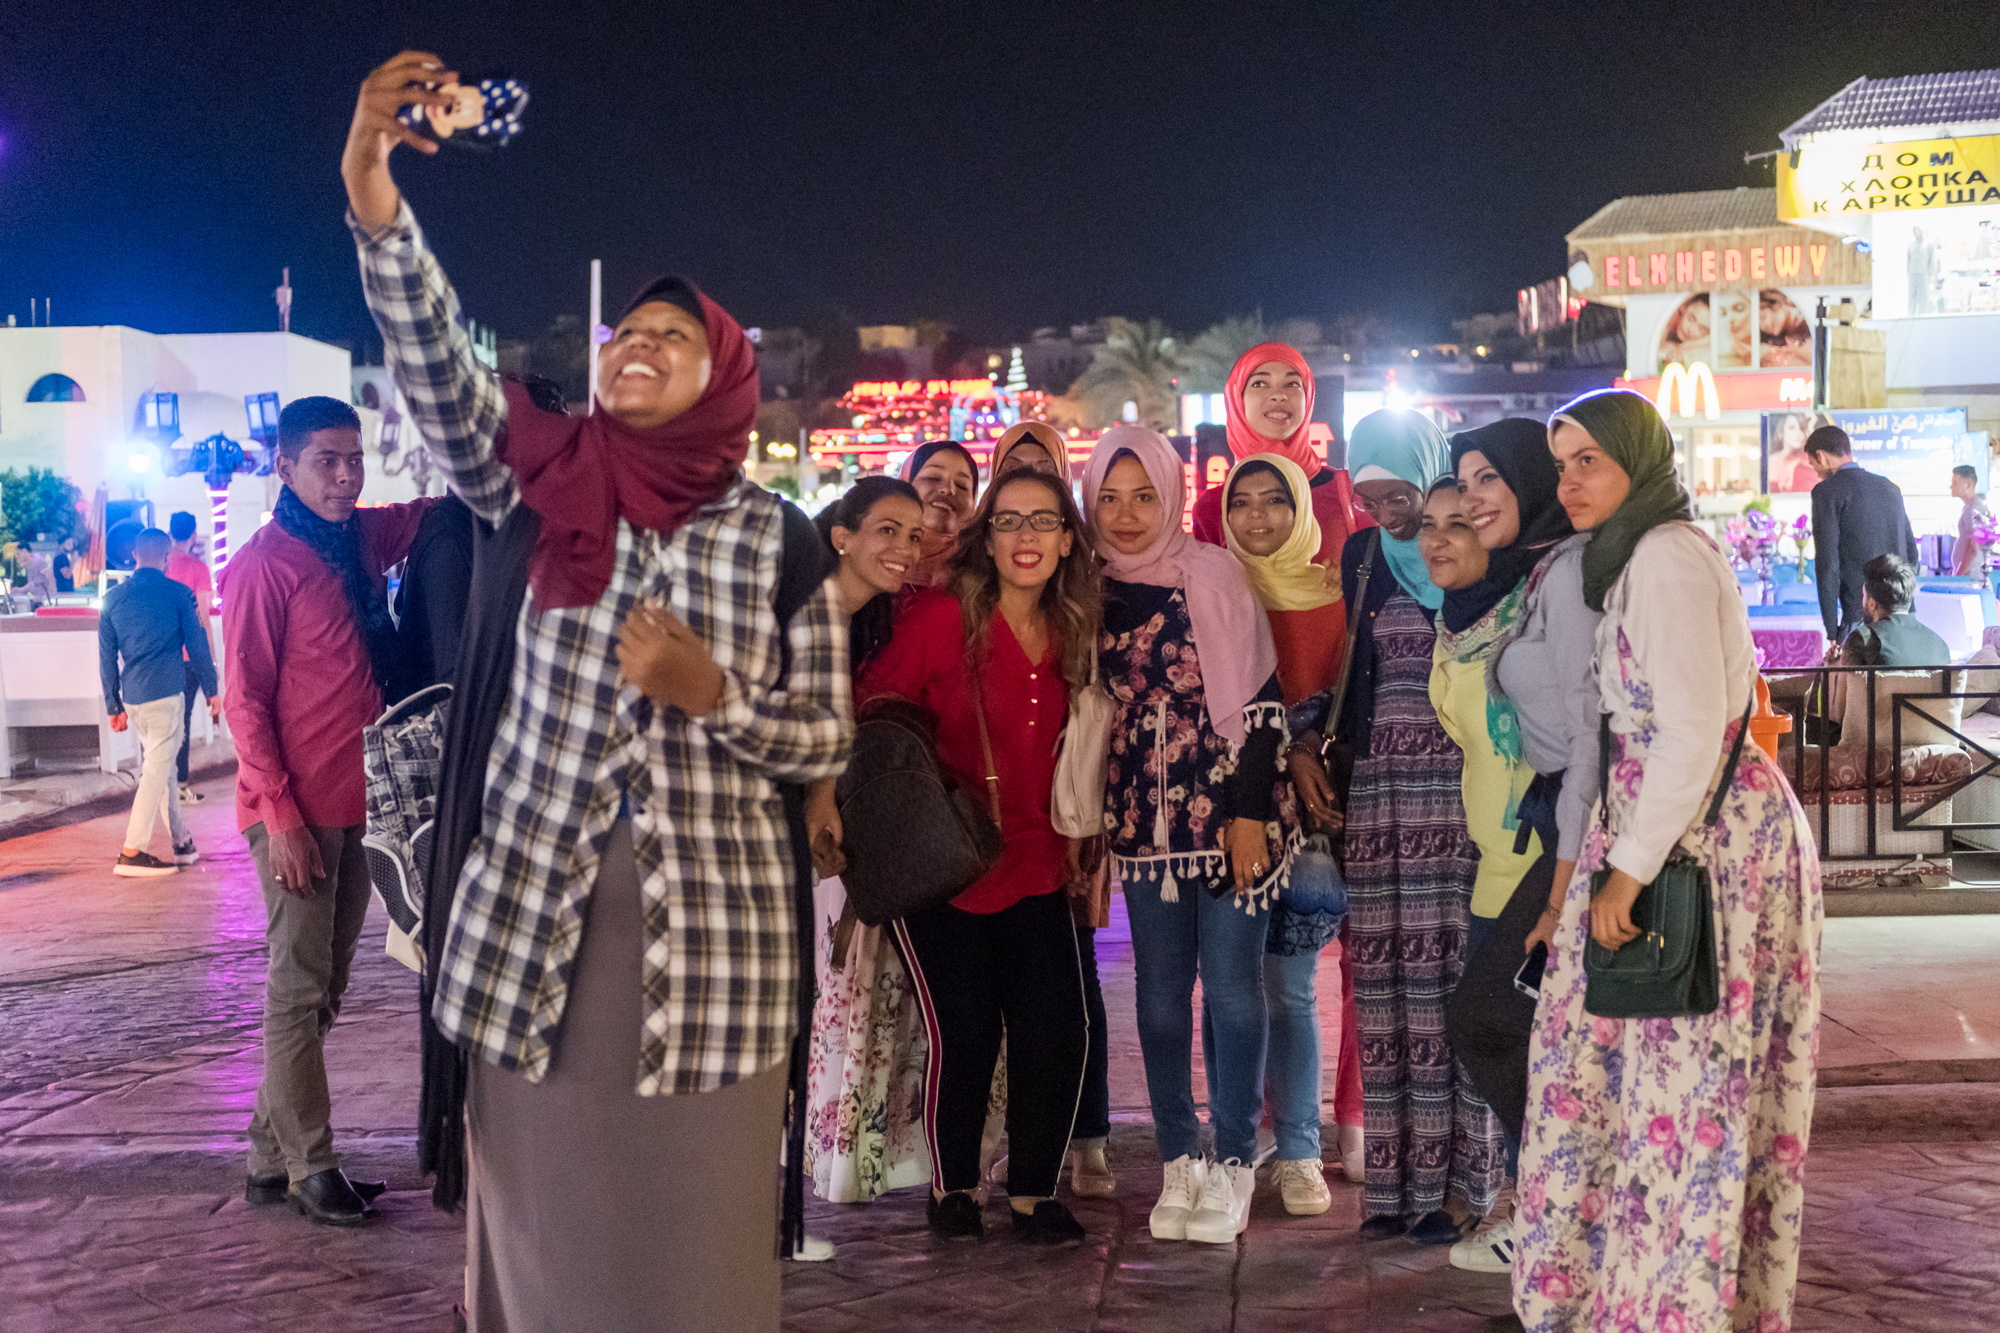  Ingy Helal (center in red) joins the initial group of 15 participant trainees for an outing at Naama Bay Night Market. 